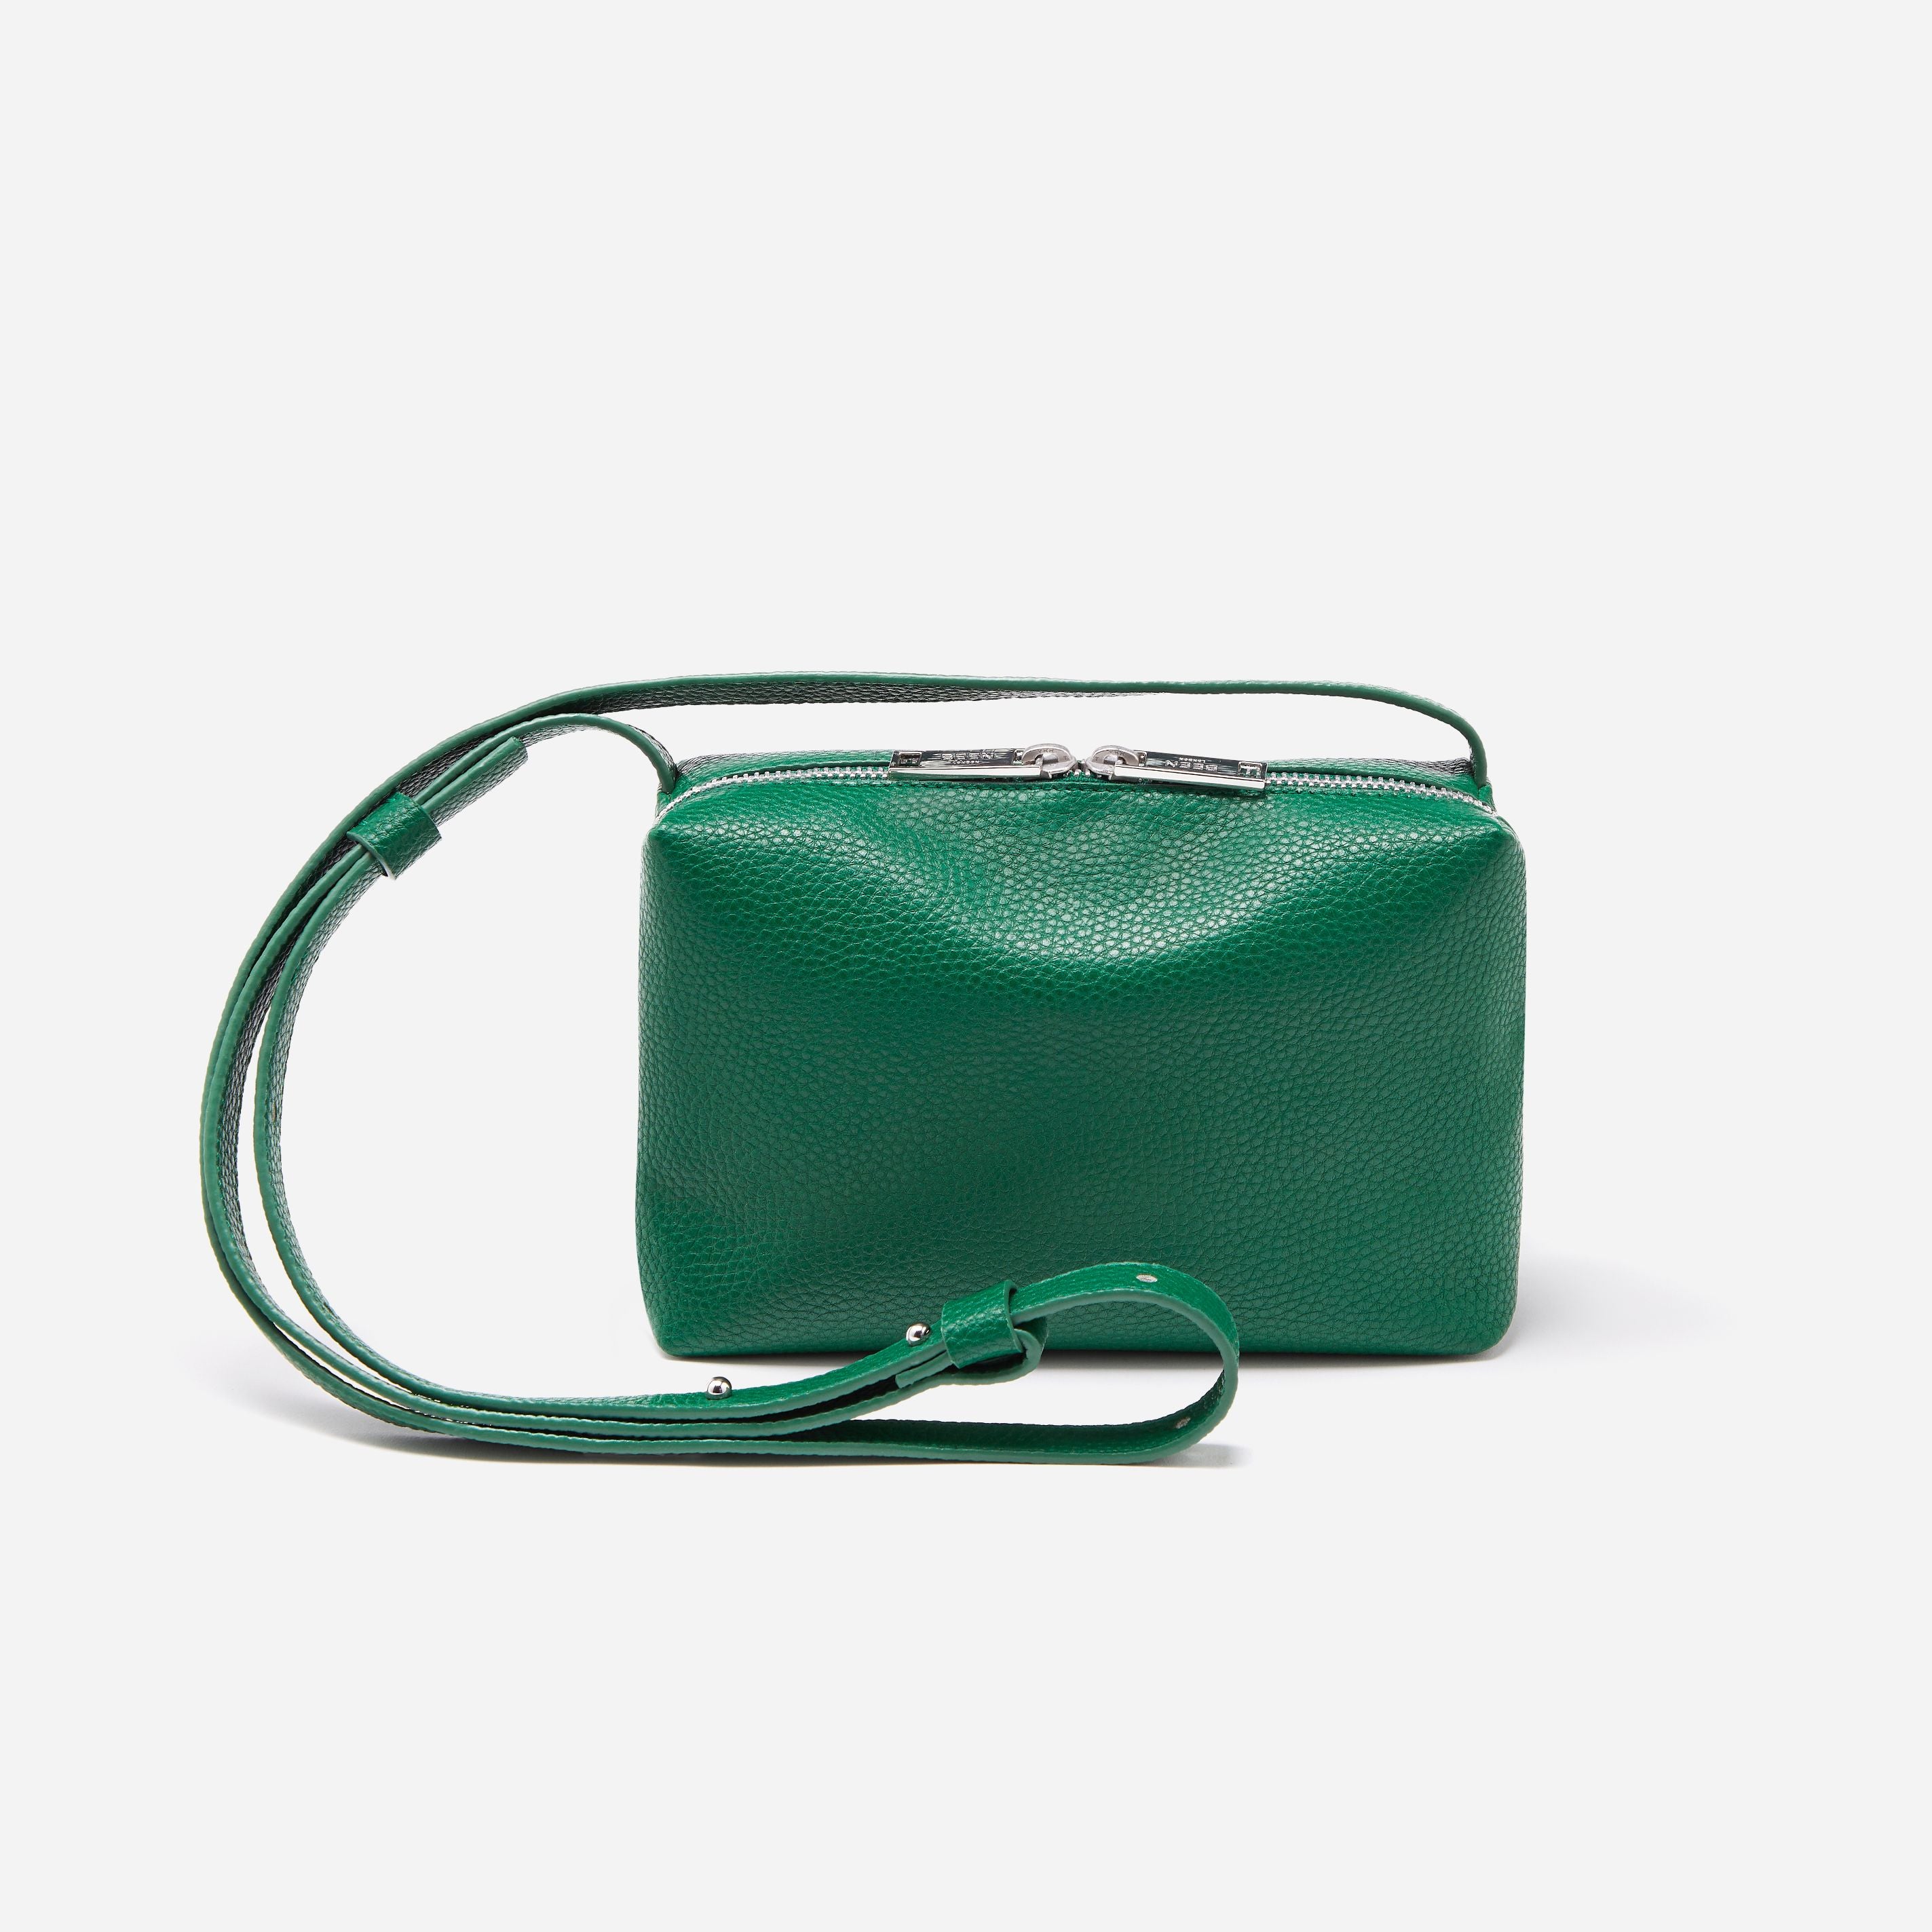 Rees Pebbled Recycled Leather Camera Bag in Rainforest Green